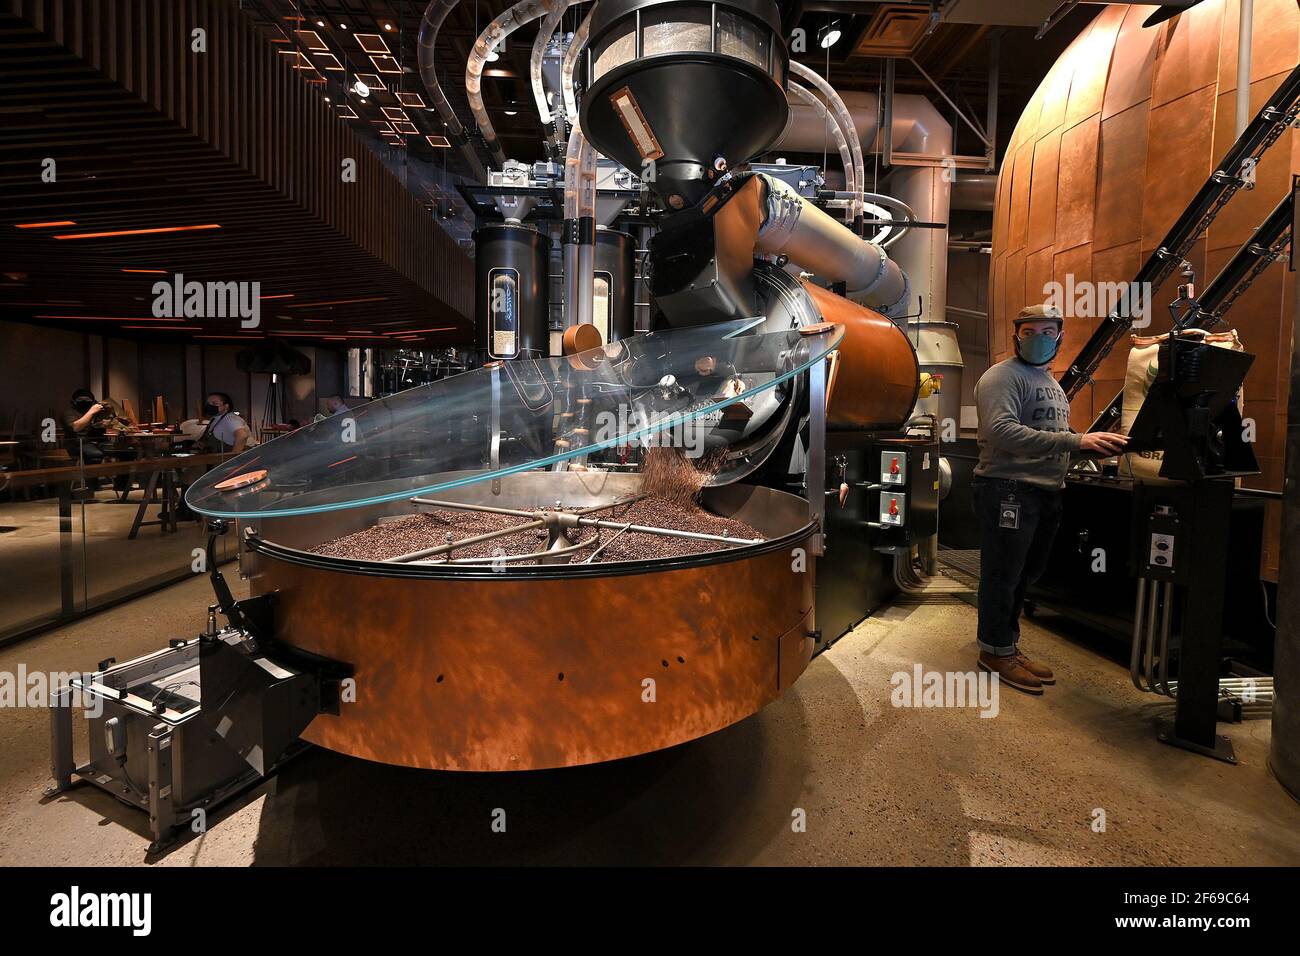 Year Of The Roaster High Resolution Stock Photography And Images Alamy